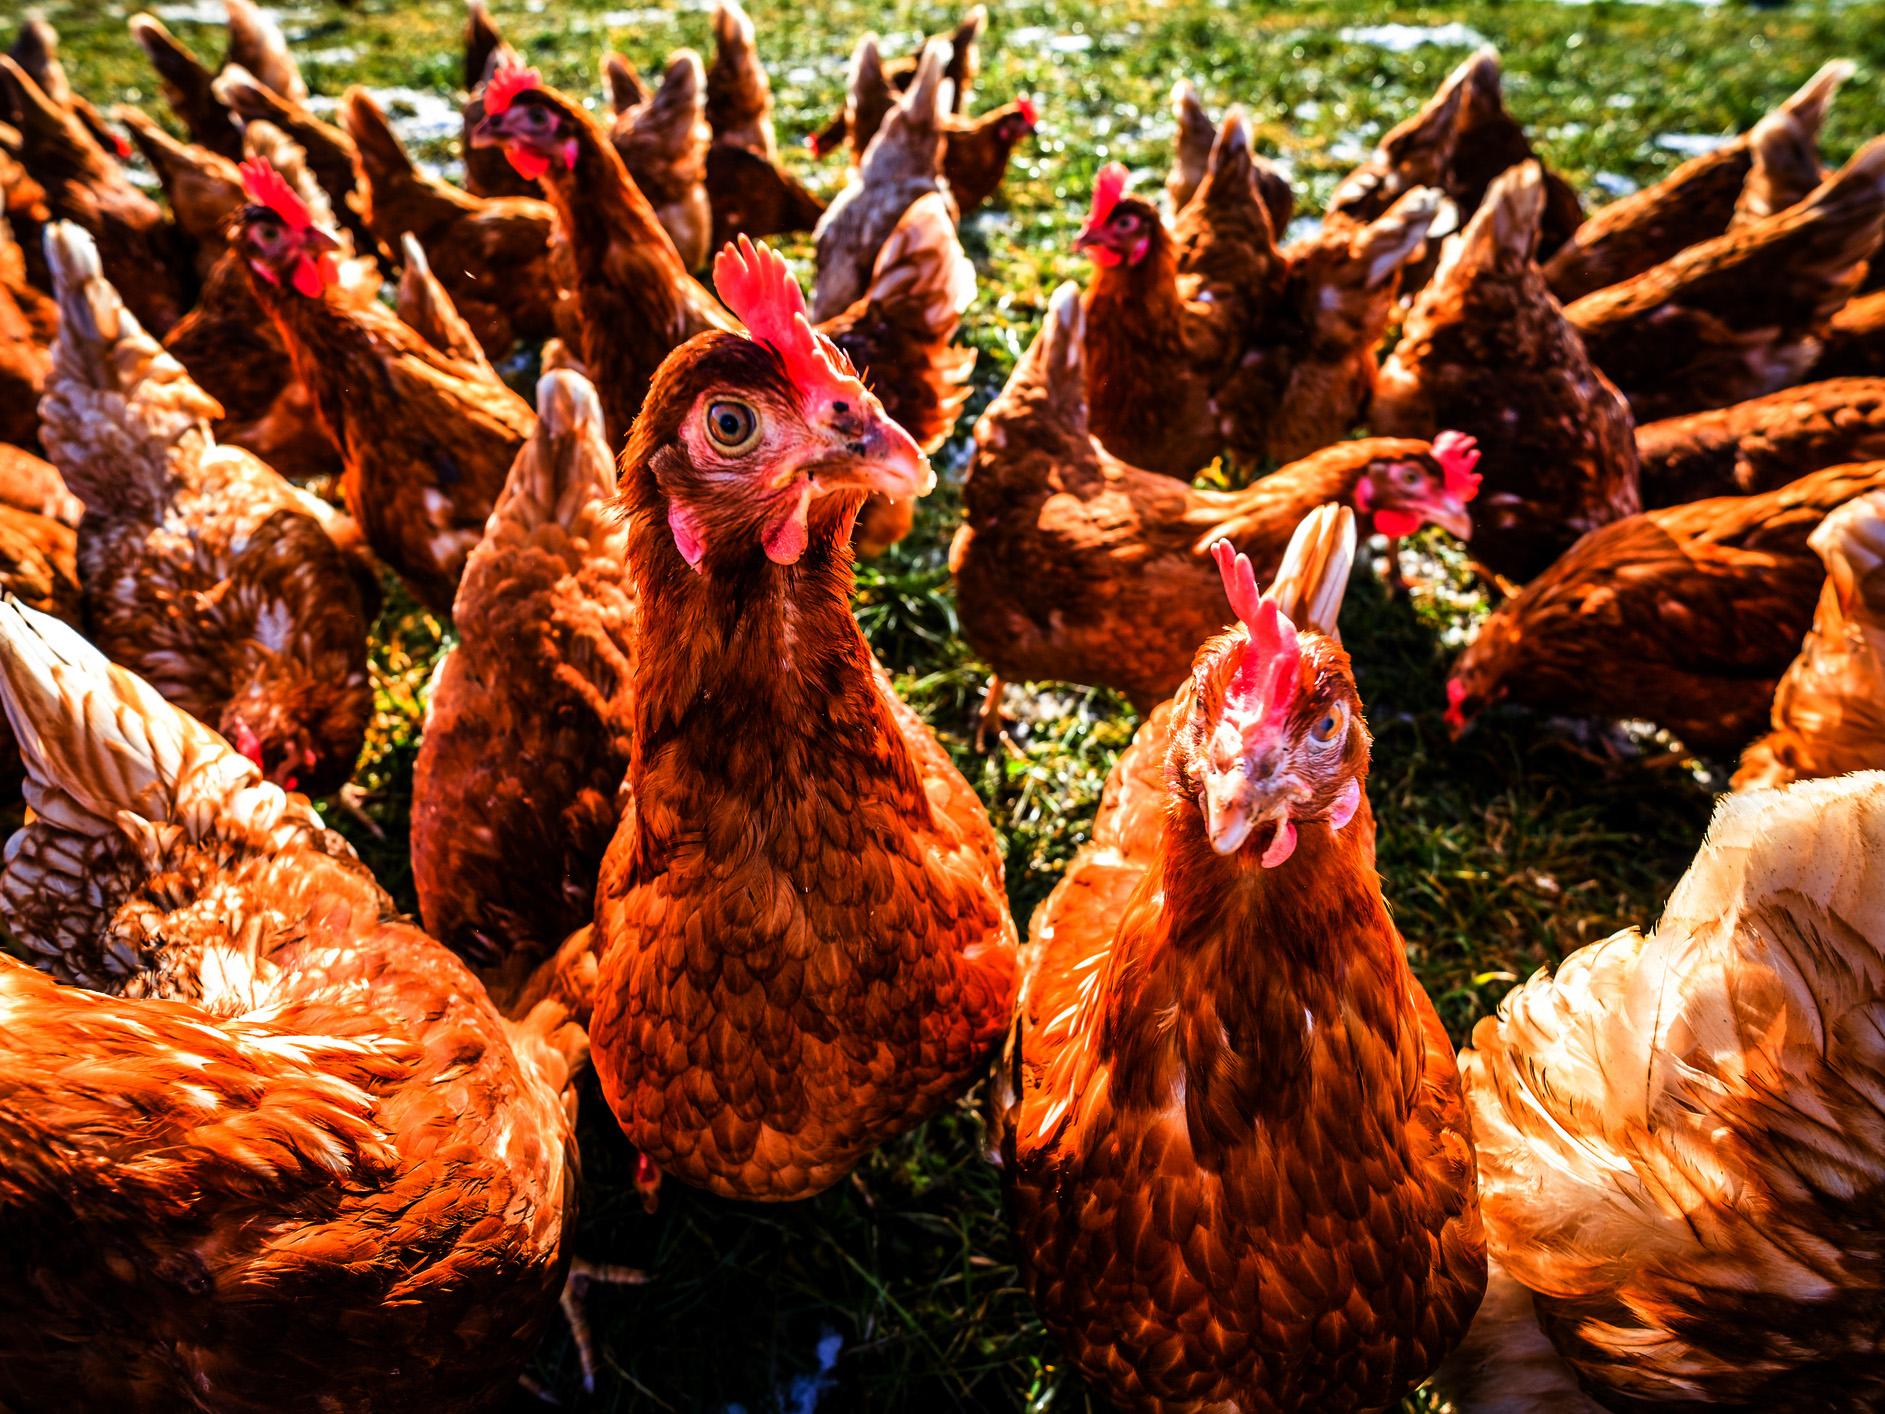 New Zealand suburb terrorised by feral chickens in 'Stephen King-like scenes'